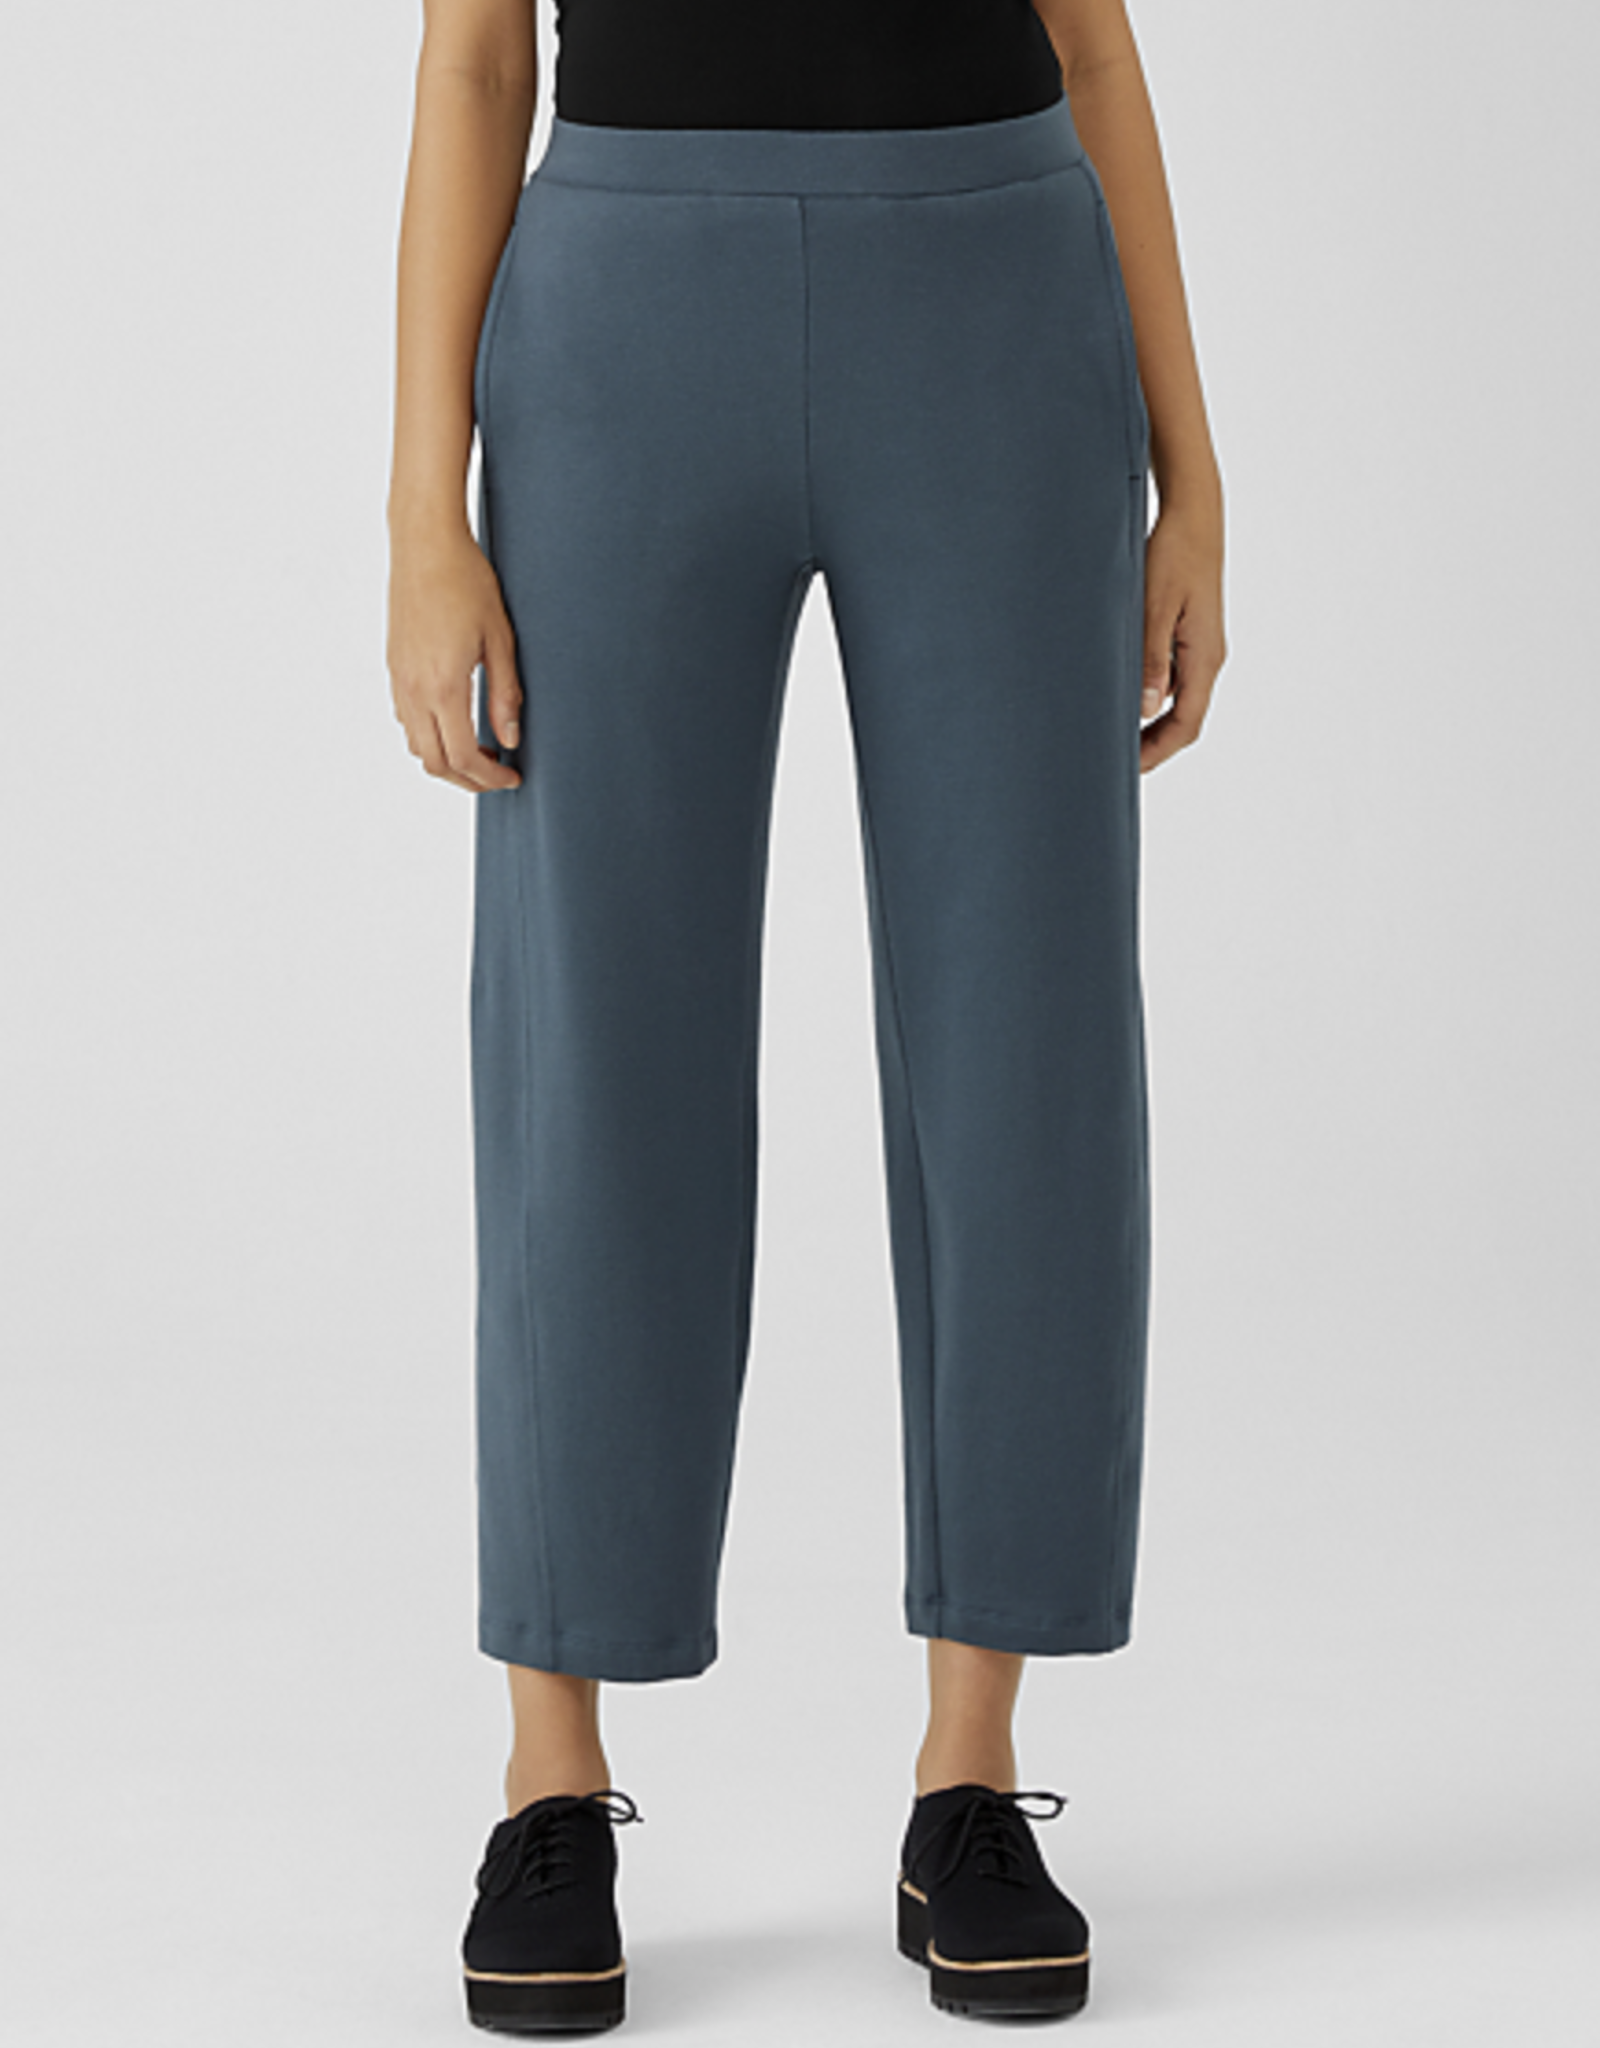 Eileen Fisher Lantern Ankle Pant